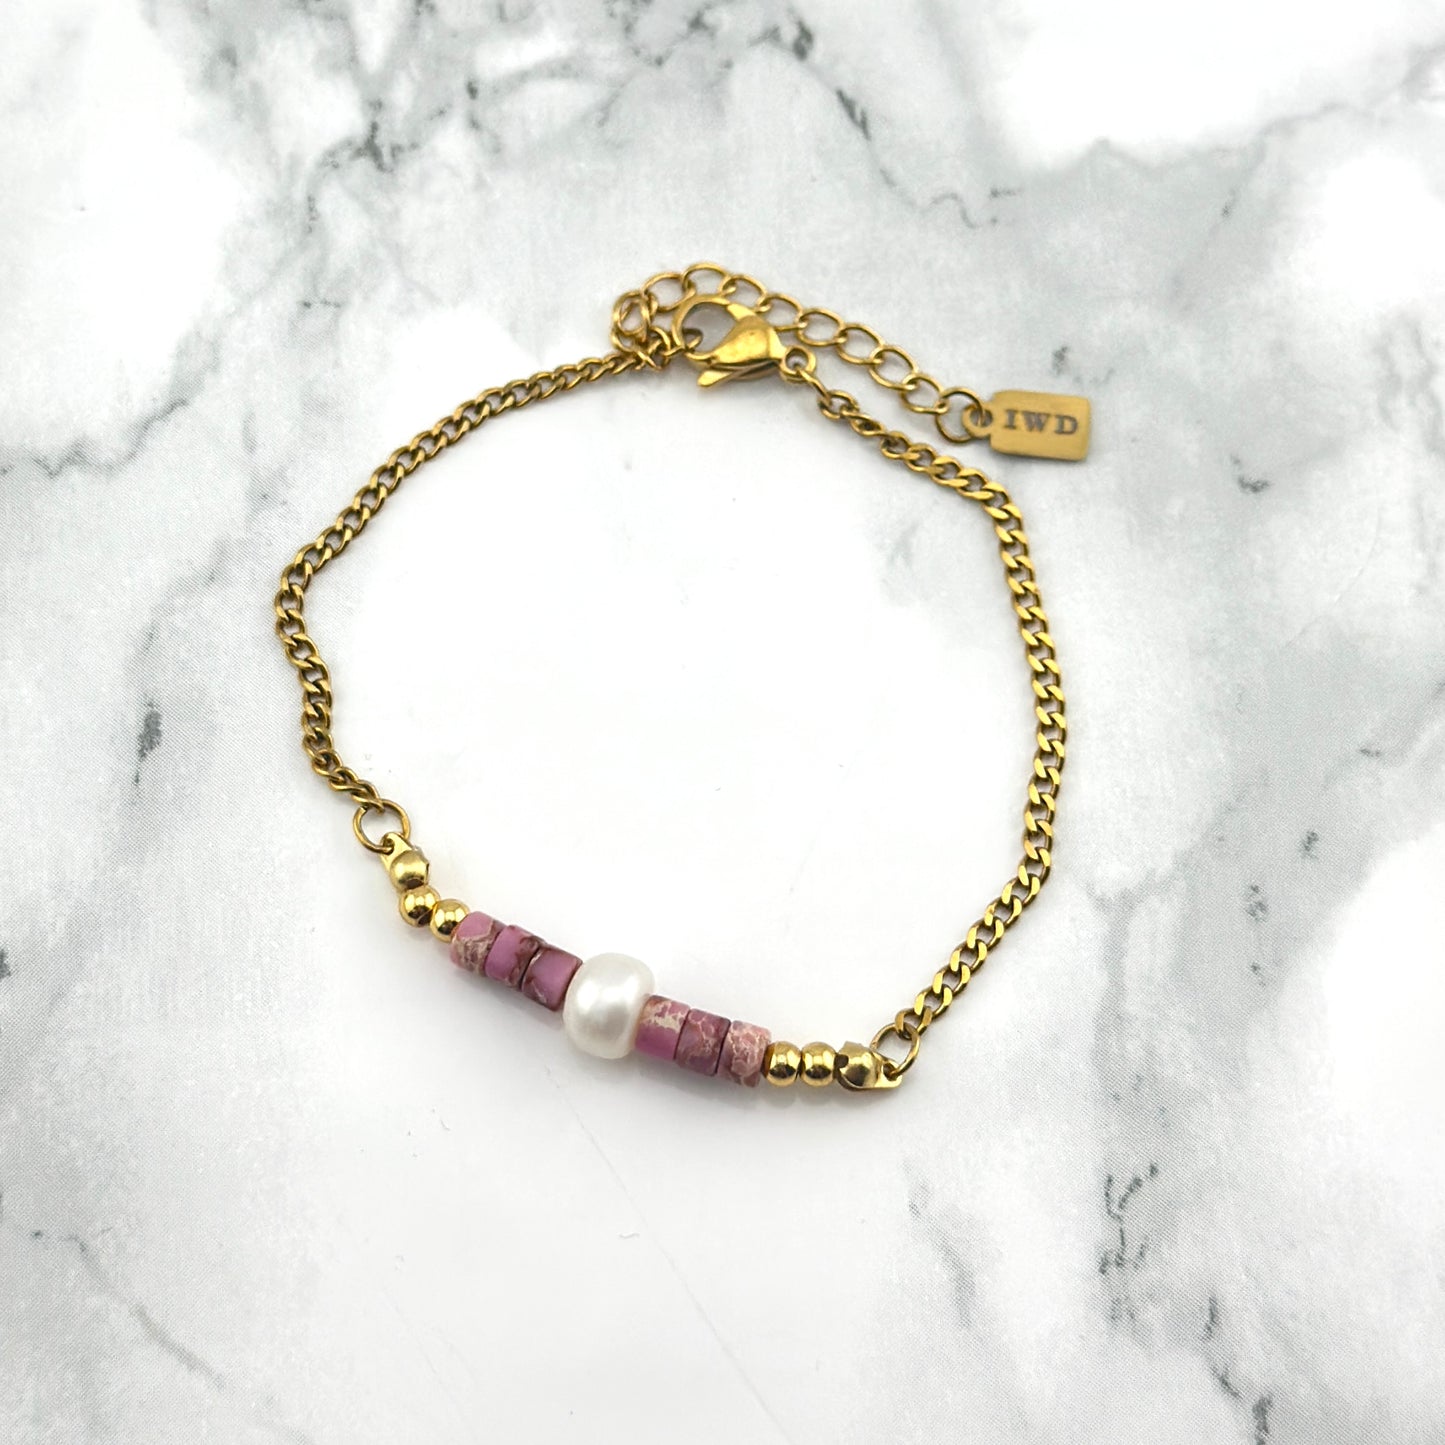 Golden Bracelet with Pink Beads